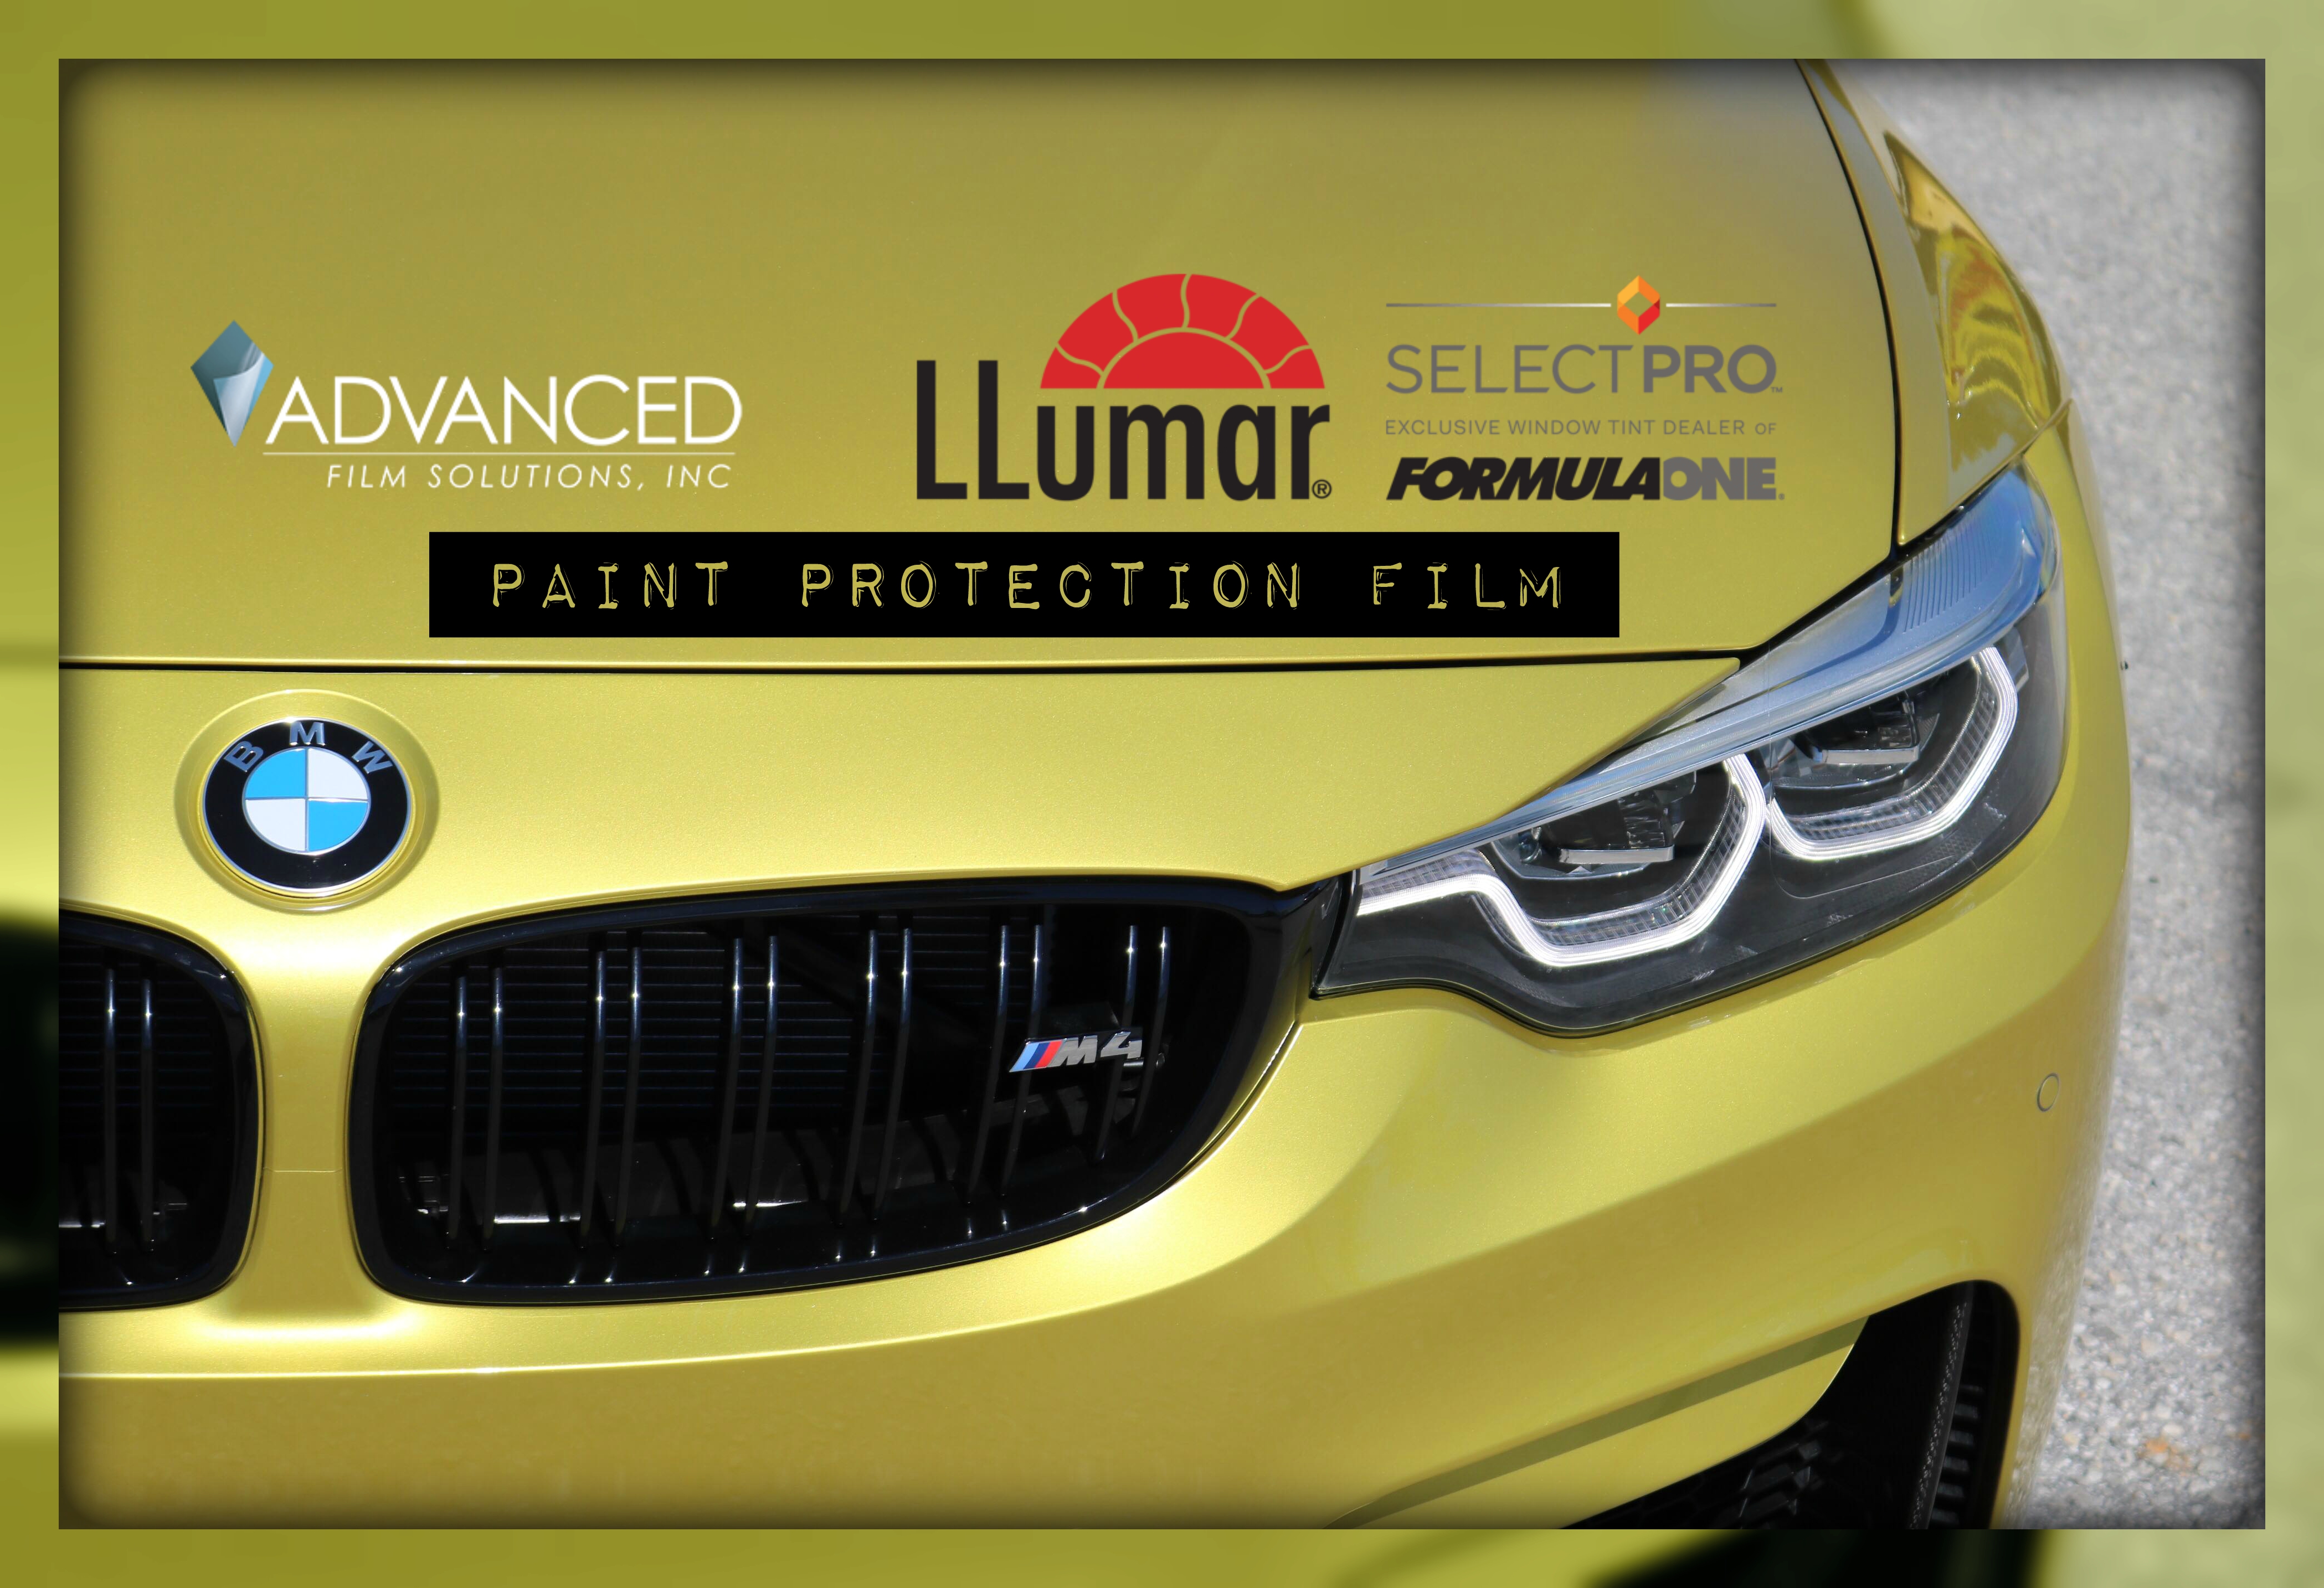 Protect Your Car’s Finish, Advanced Film Solutions Tampa Paint Protection Film